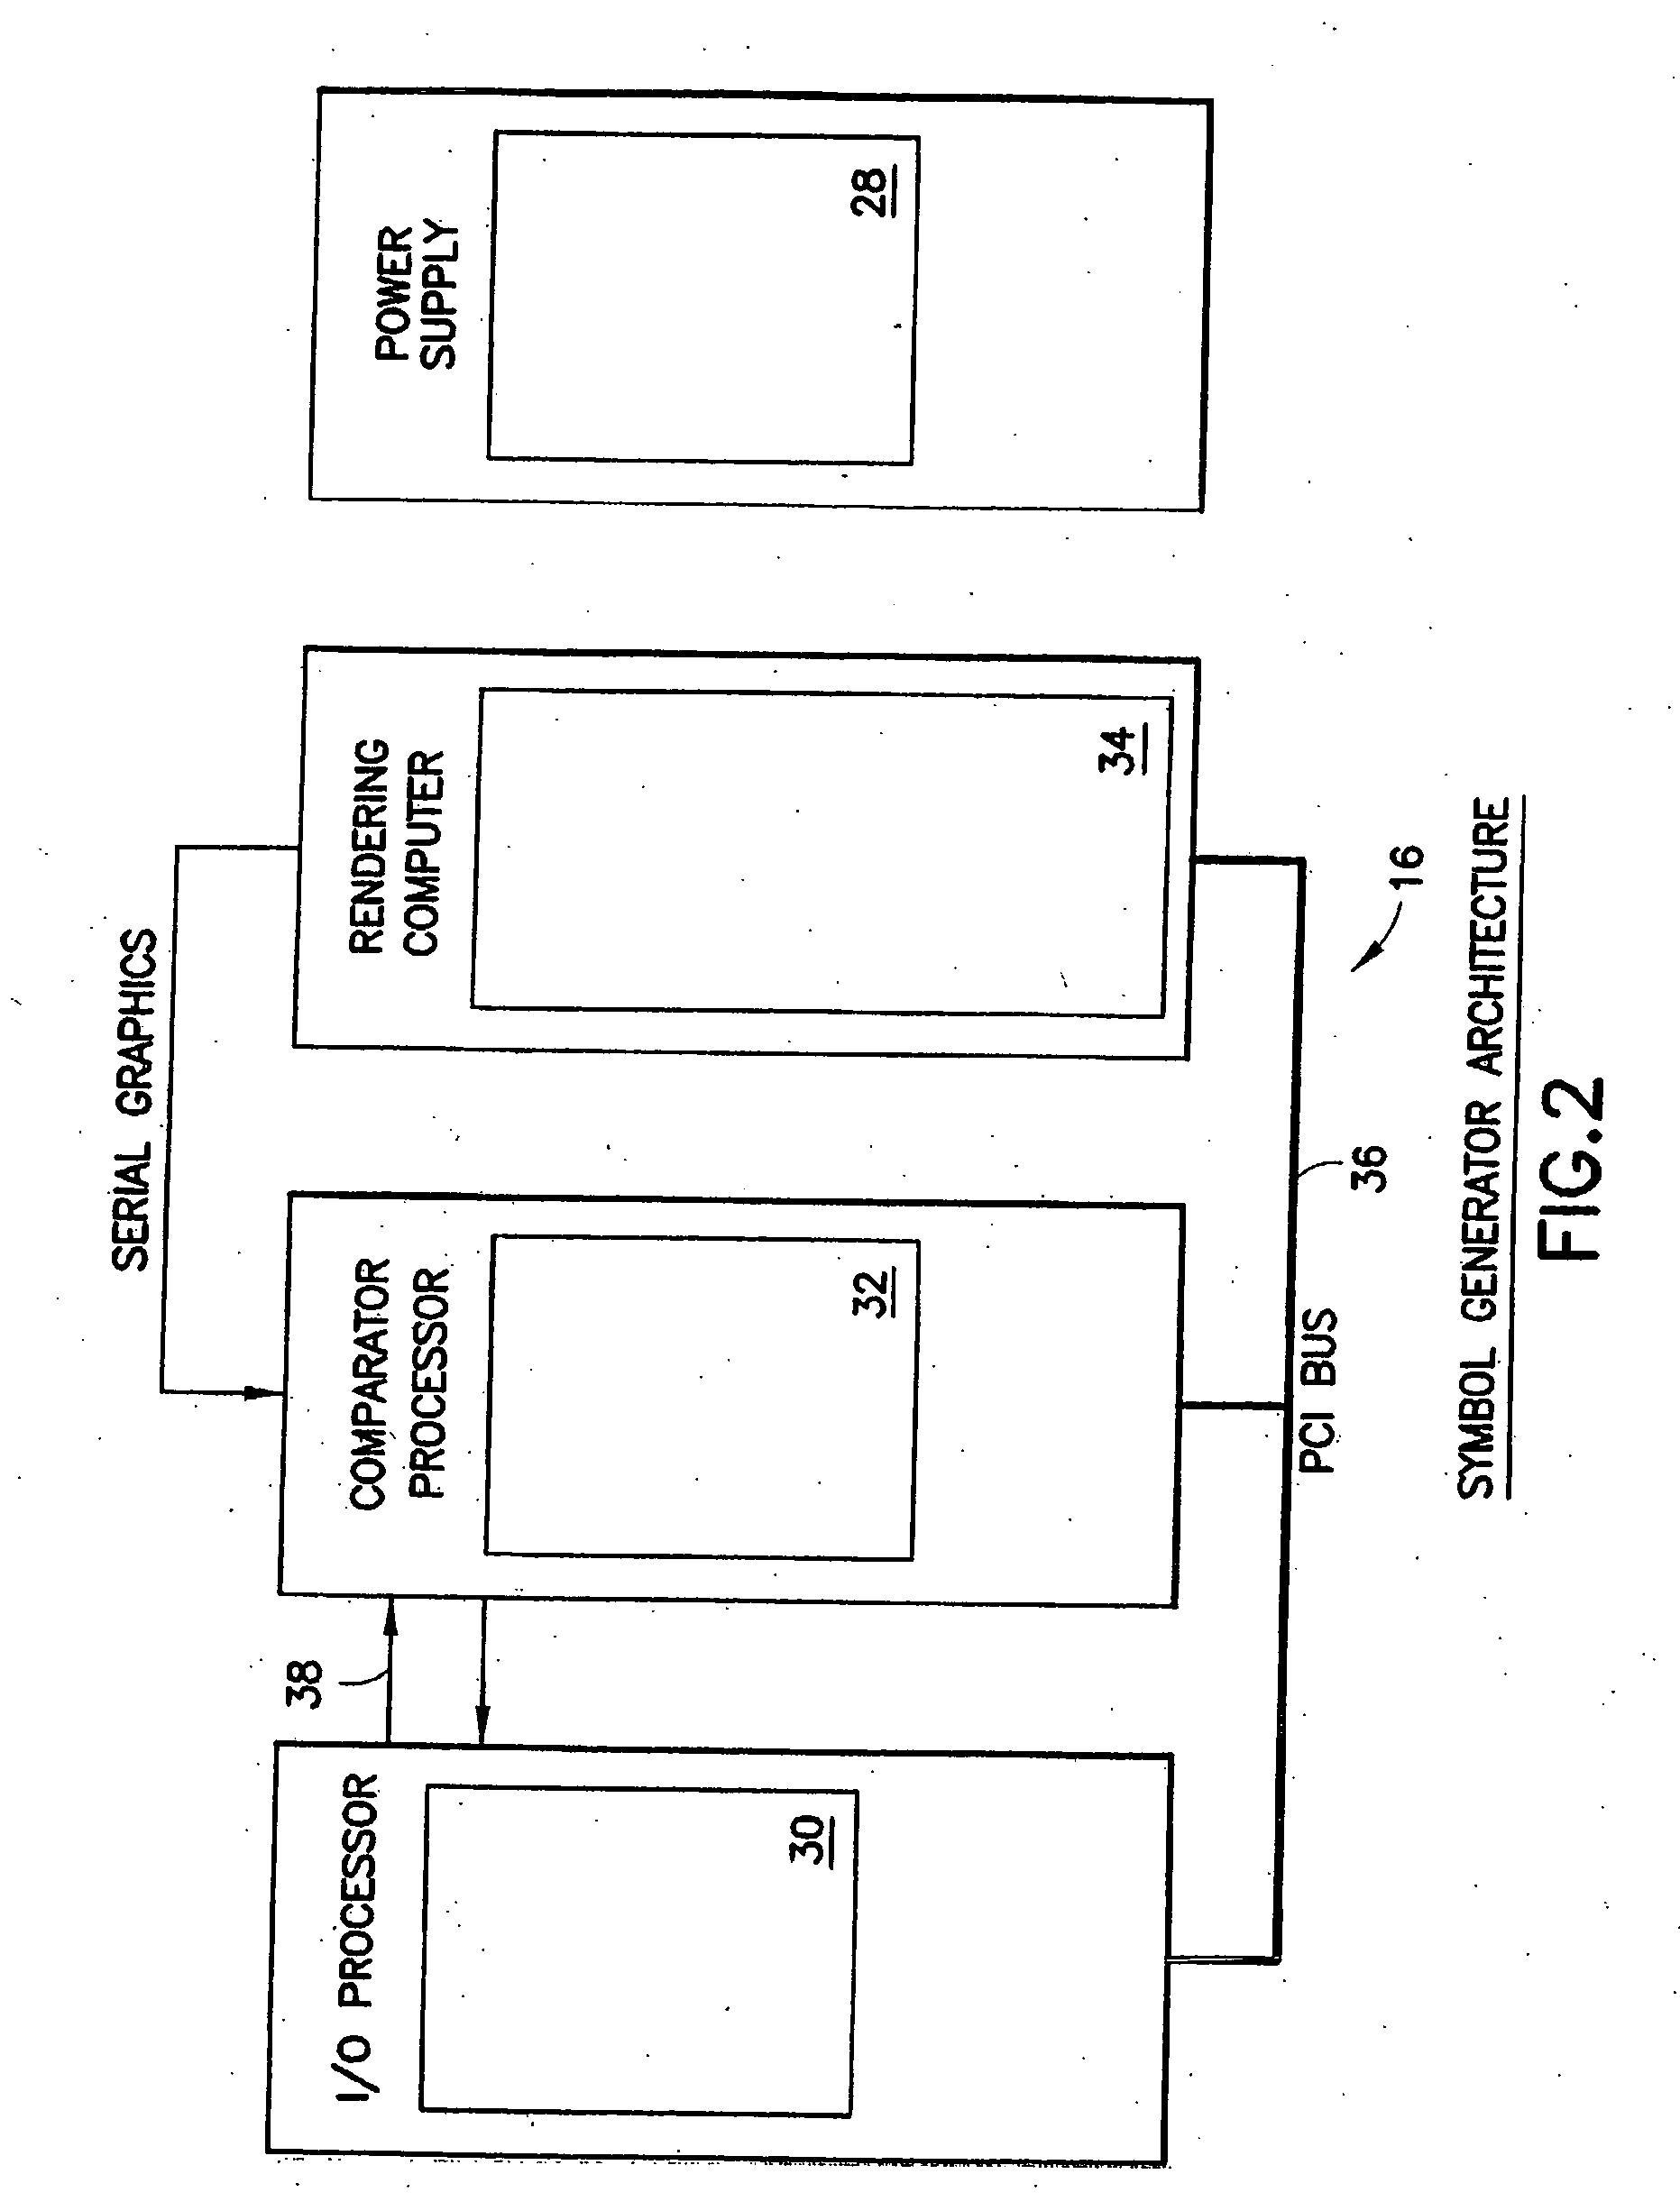 Aircraft flat panel display system with improved information availability